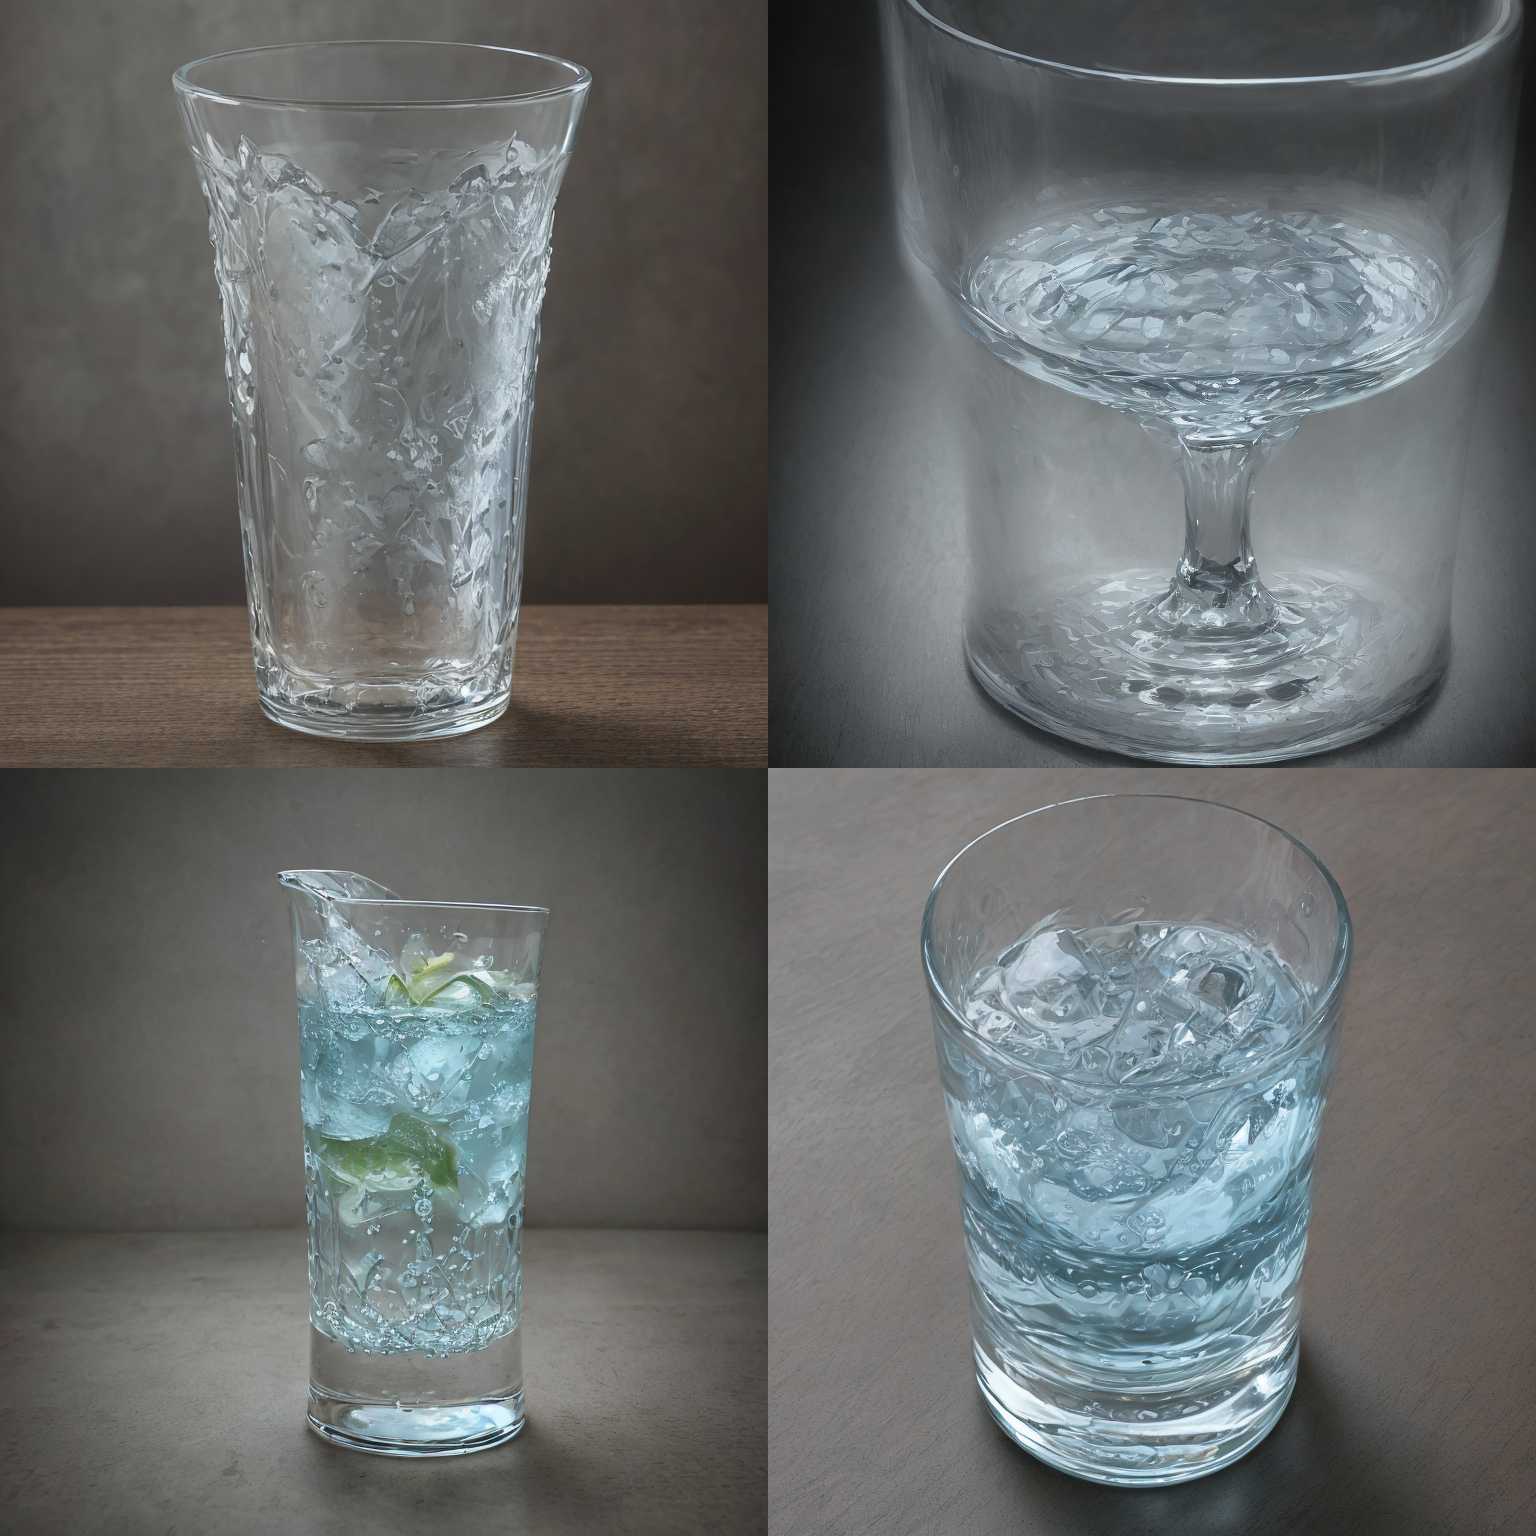 A glass of water held upright